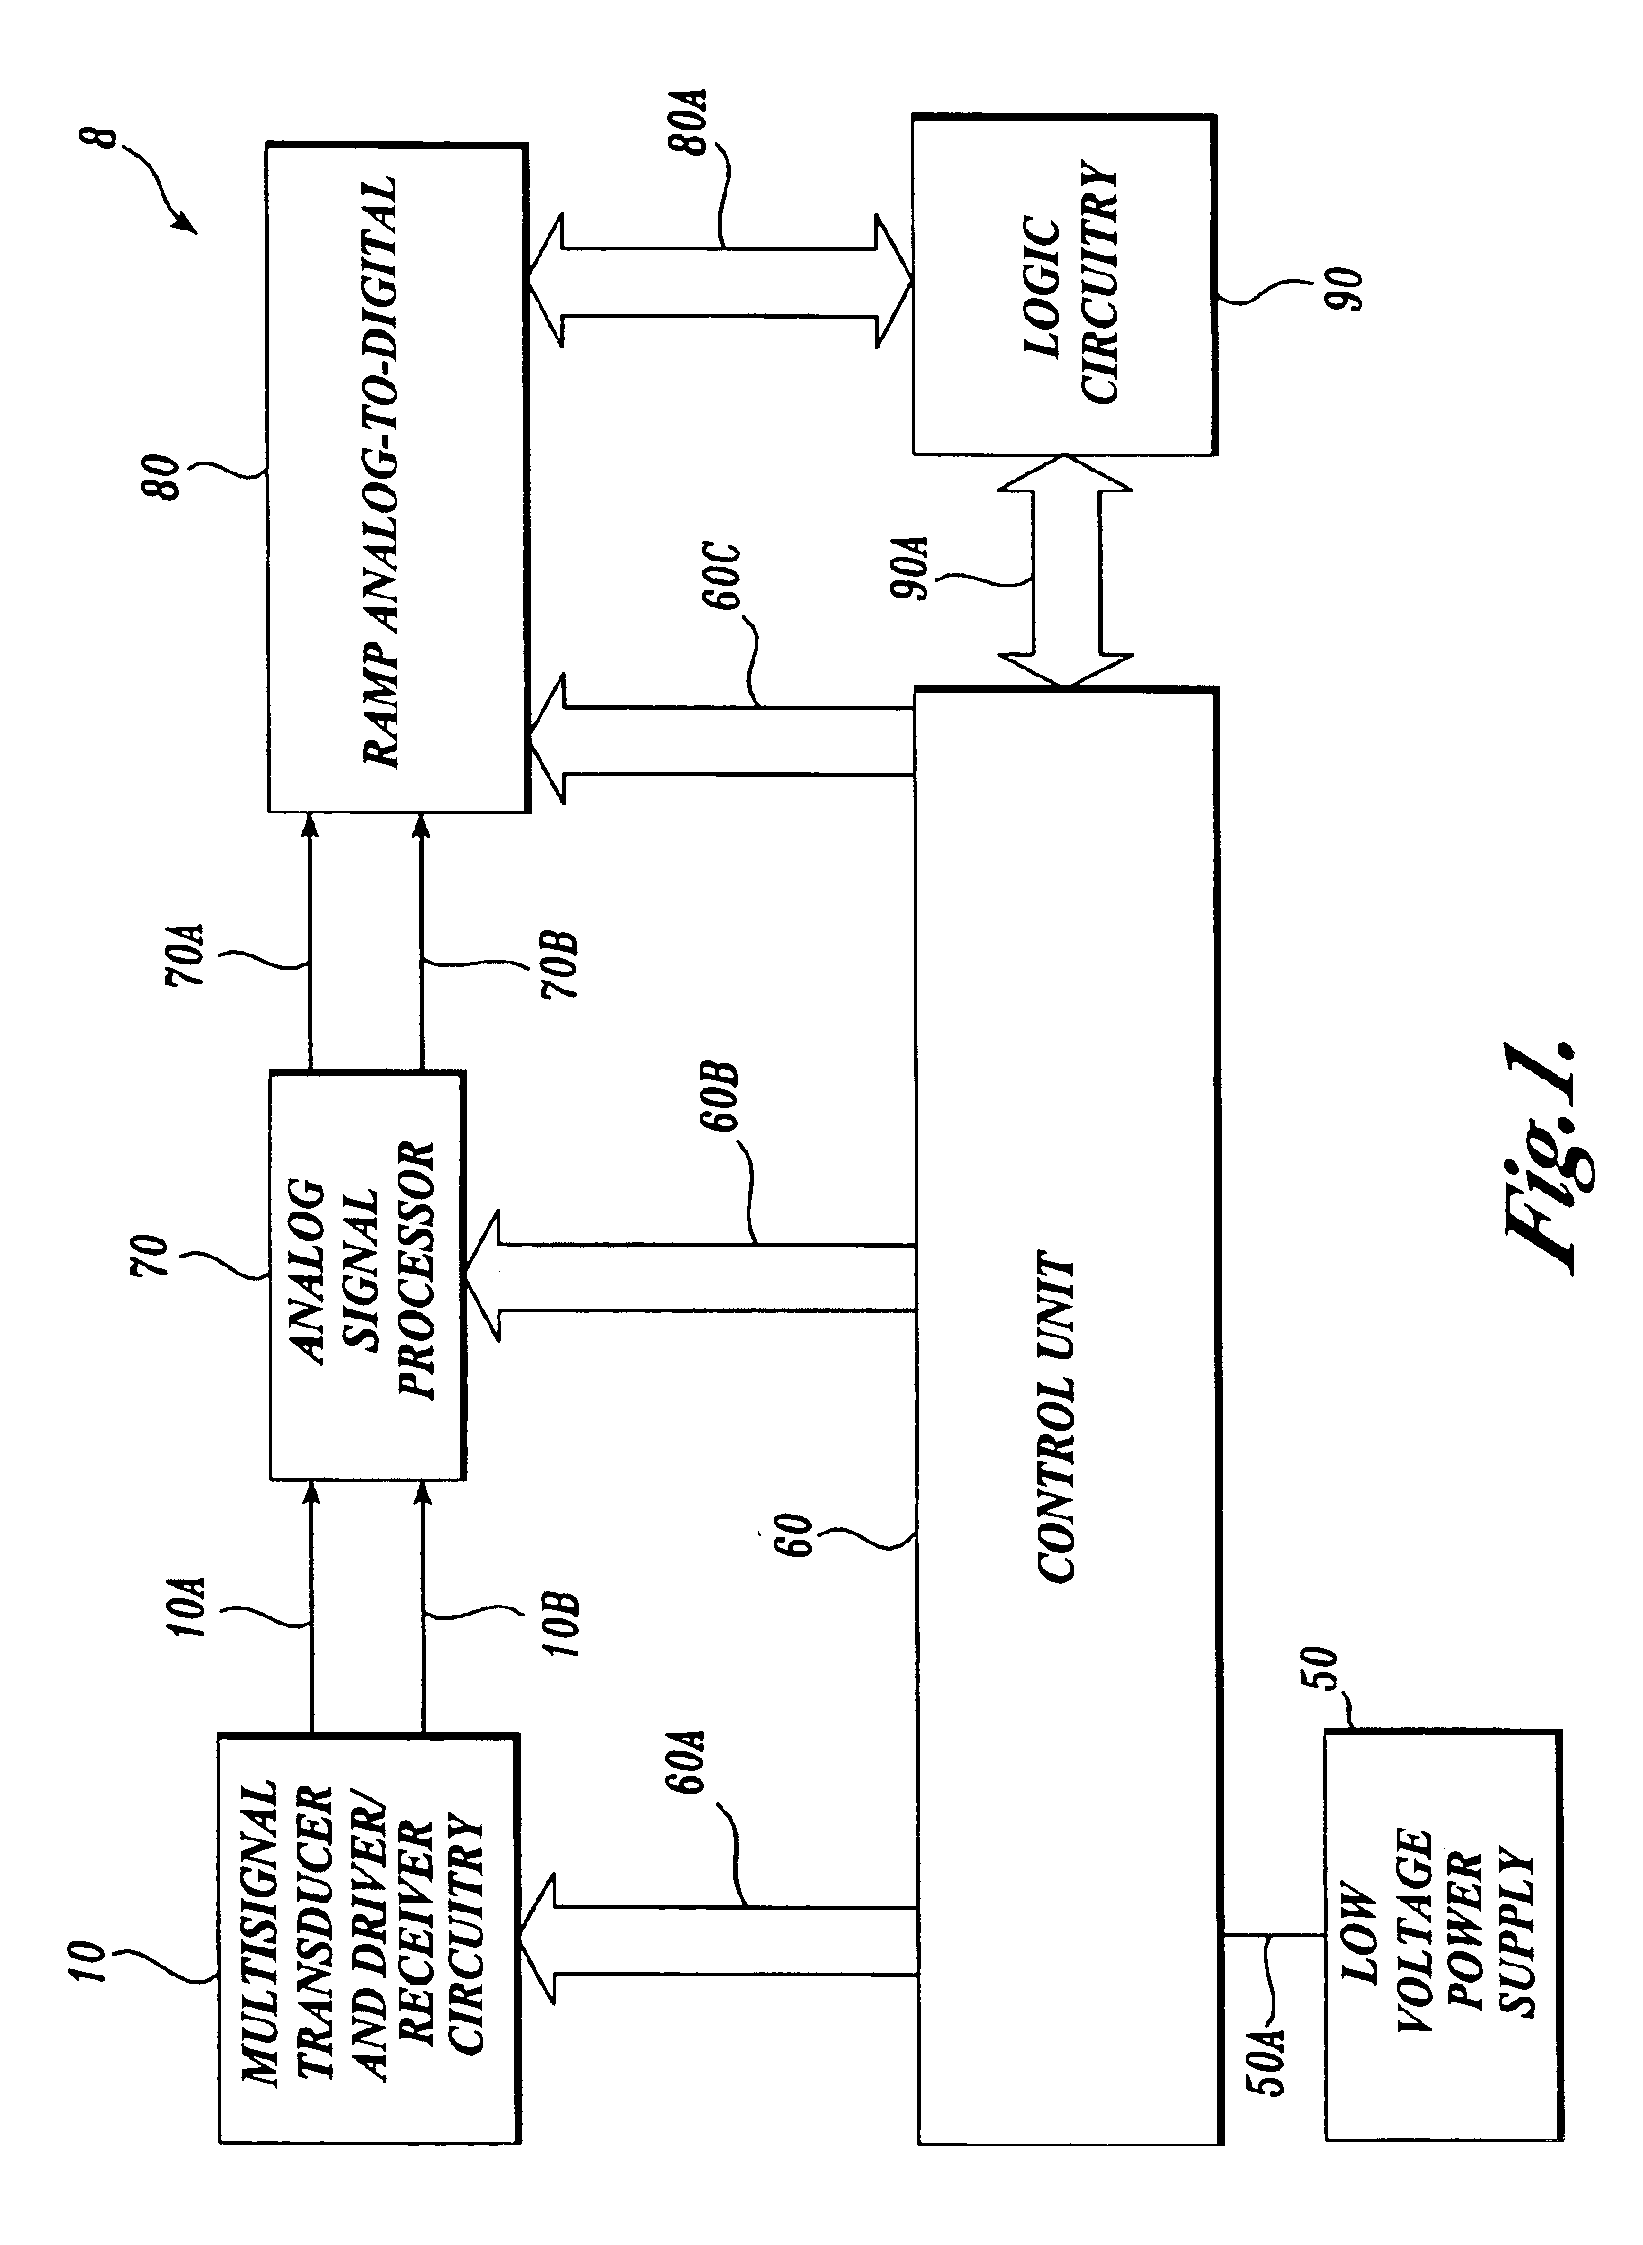 Low voltage low power signal processing system and method for high accuracy processing of differential signal inputs from a low power measuring instrument